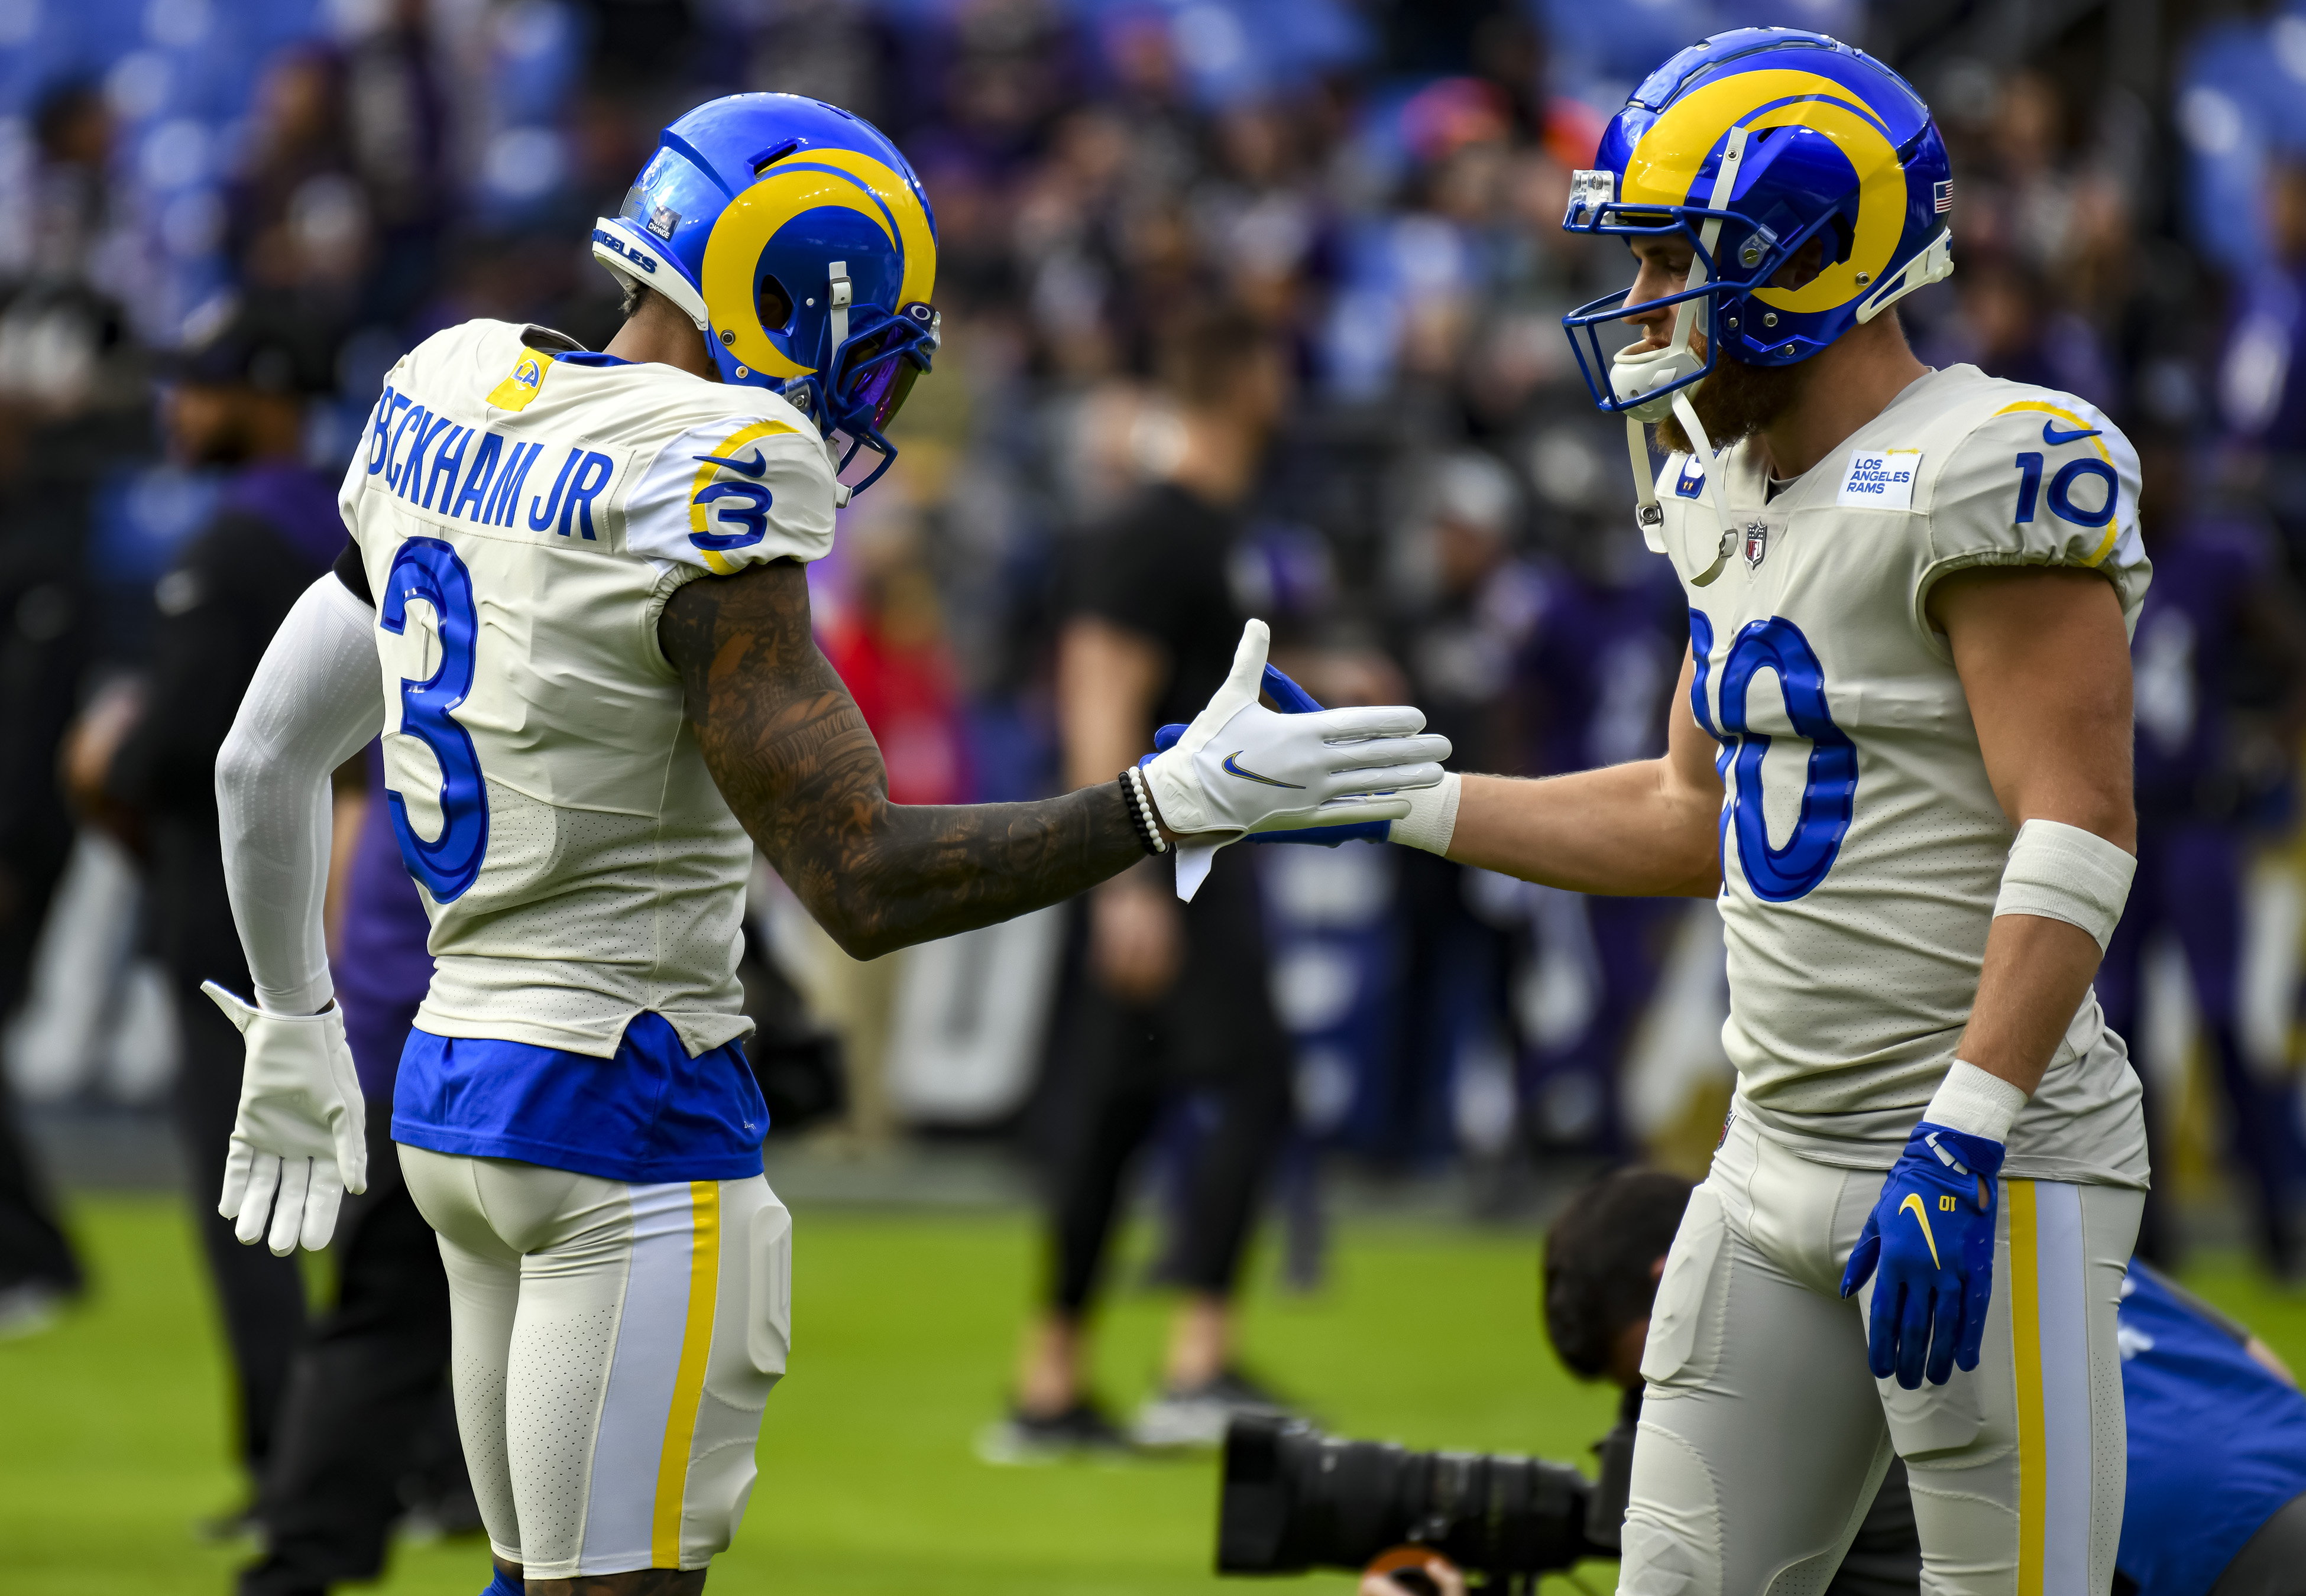 The Rams can clinch the NFC West with a victory on Sunday